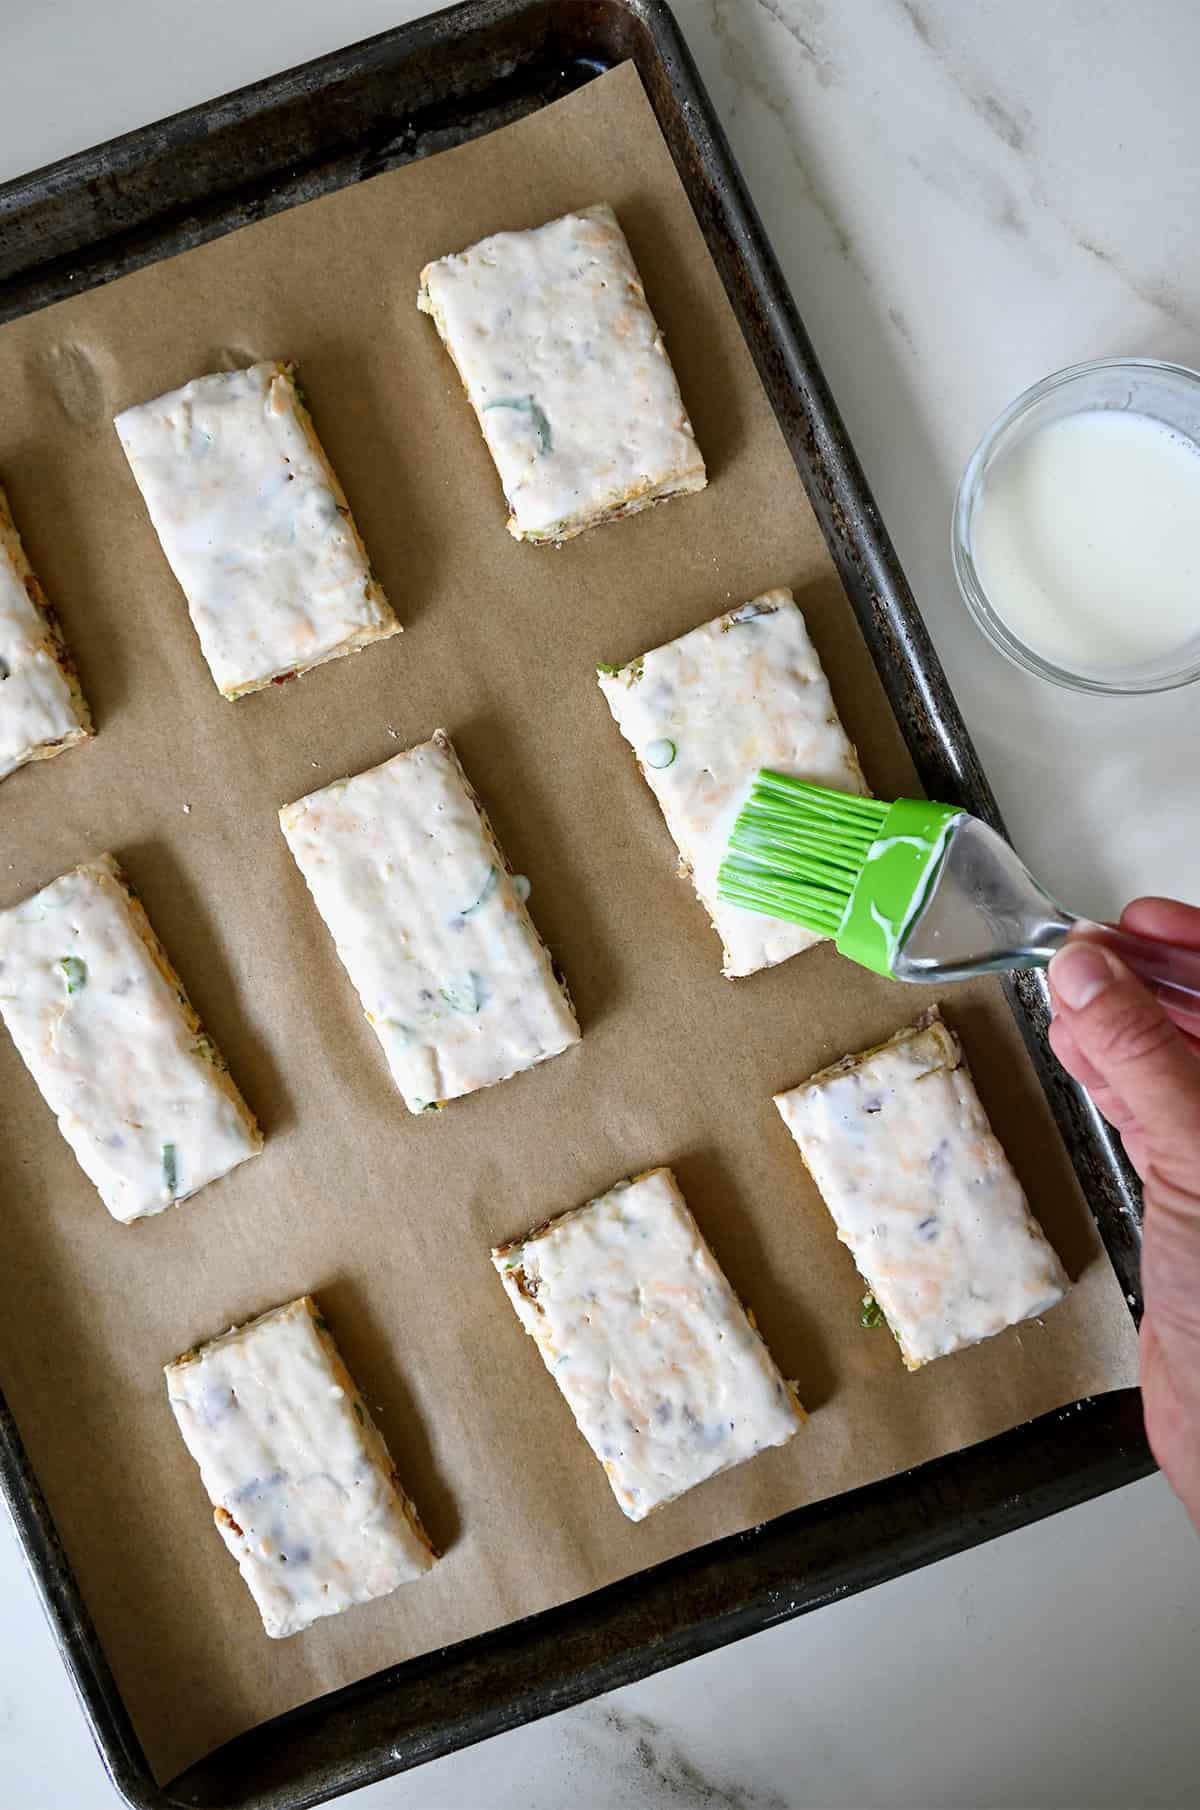 A hand holding a pastry brush applies heavy cream atop biscuits on a parchment paper-lined baking sheet.